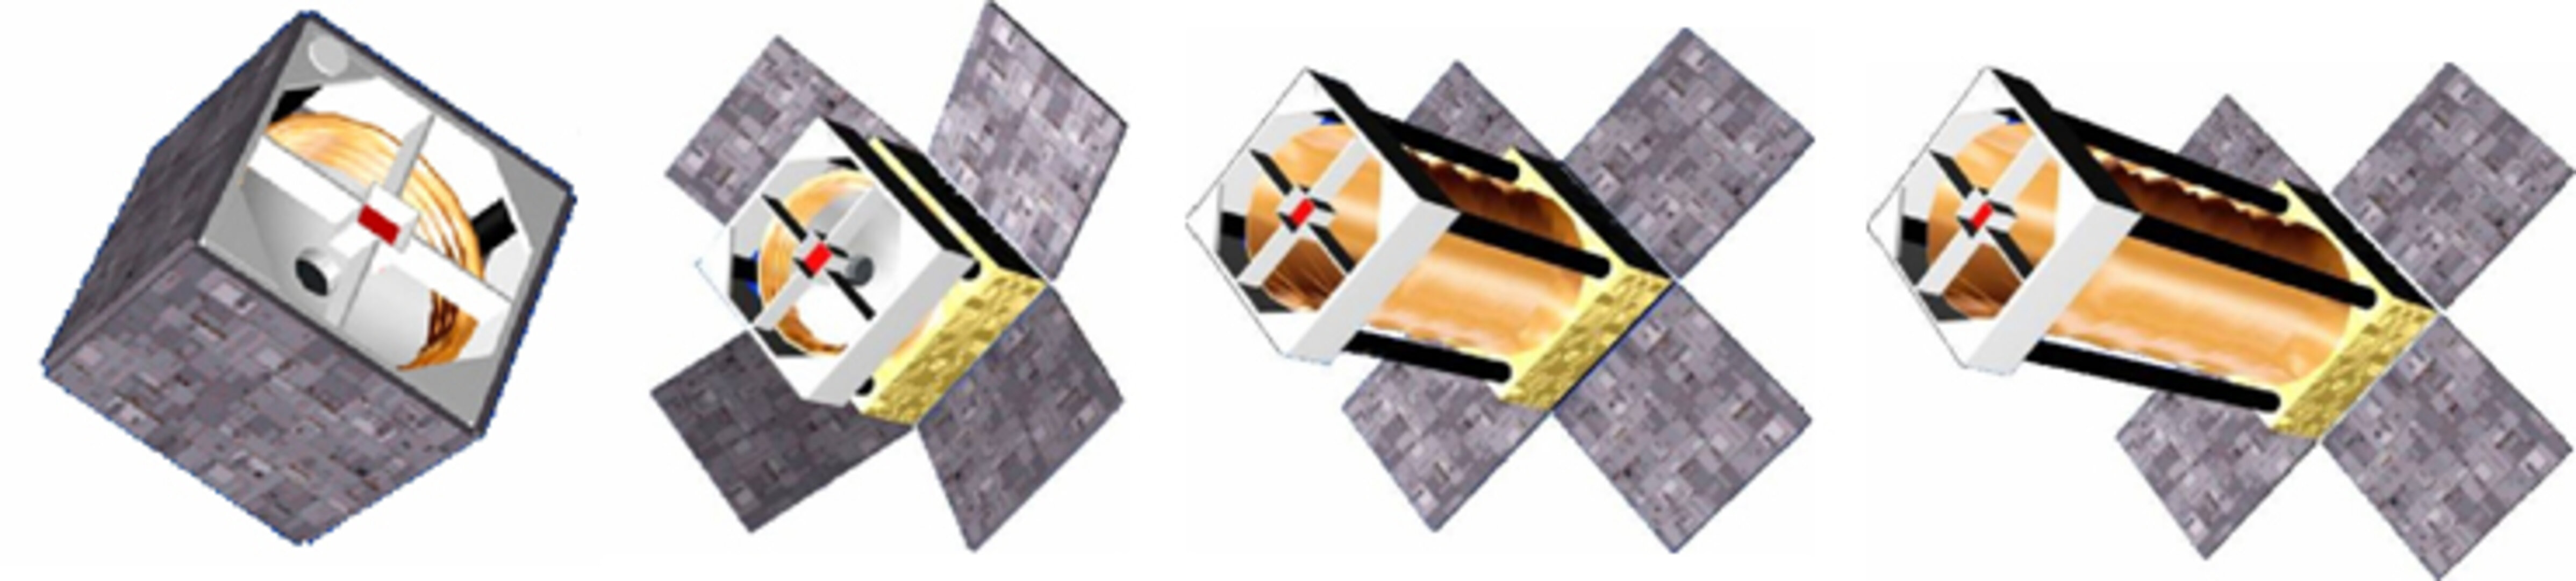 Deployment sequence of the Dobson telescope